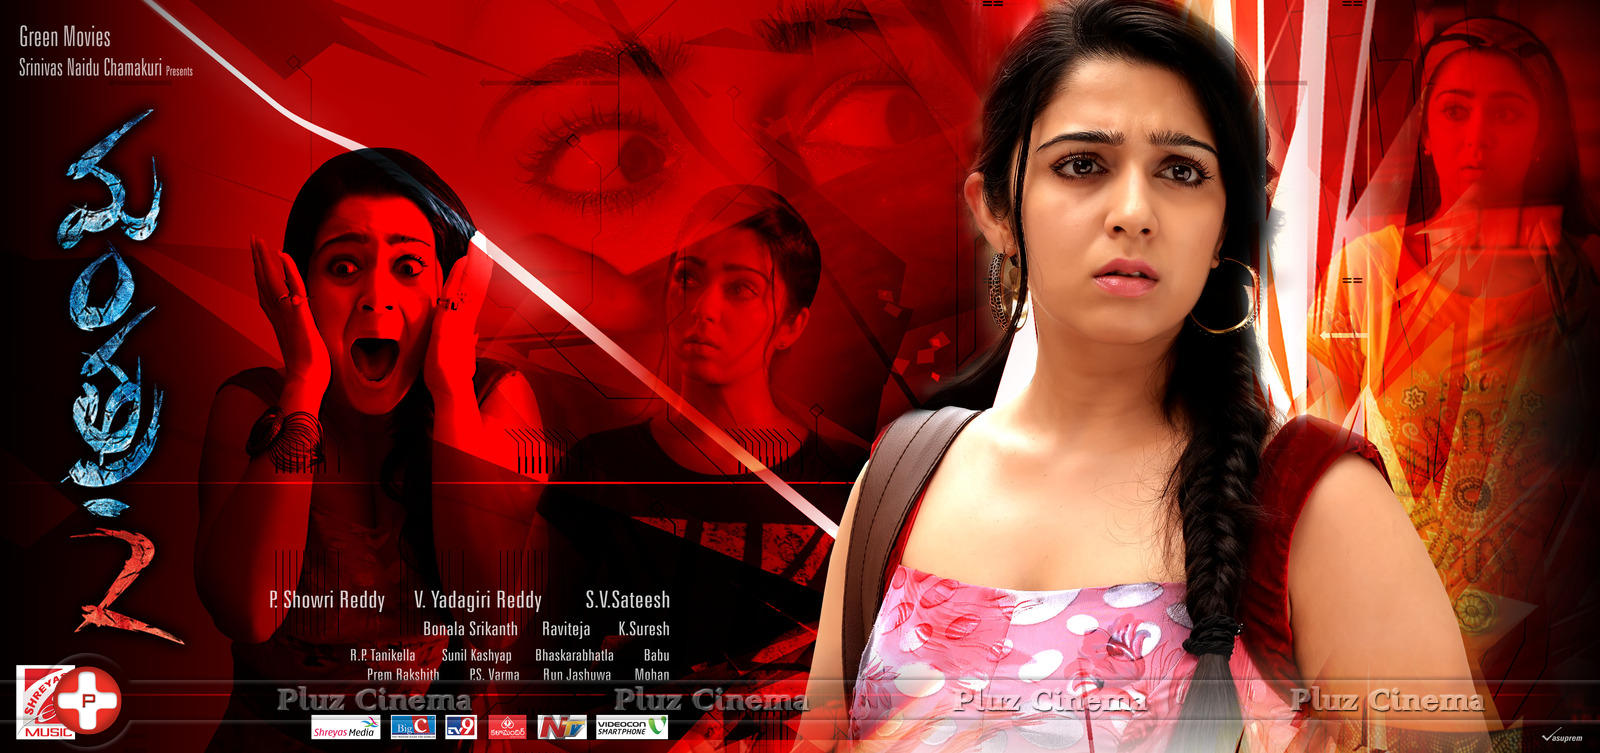 Mantra 2 Movie Posters | Picture 1044450